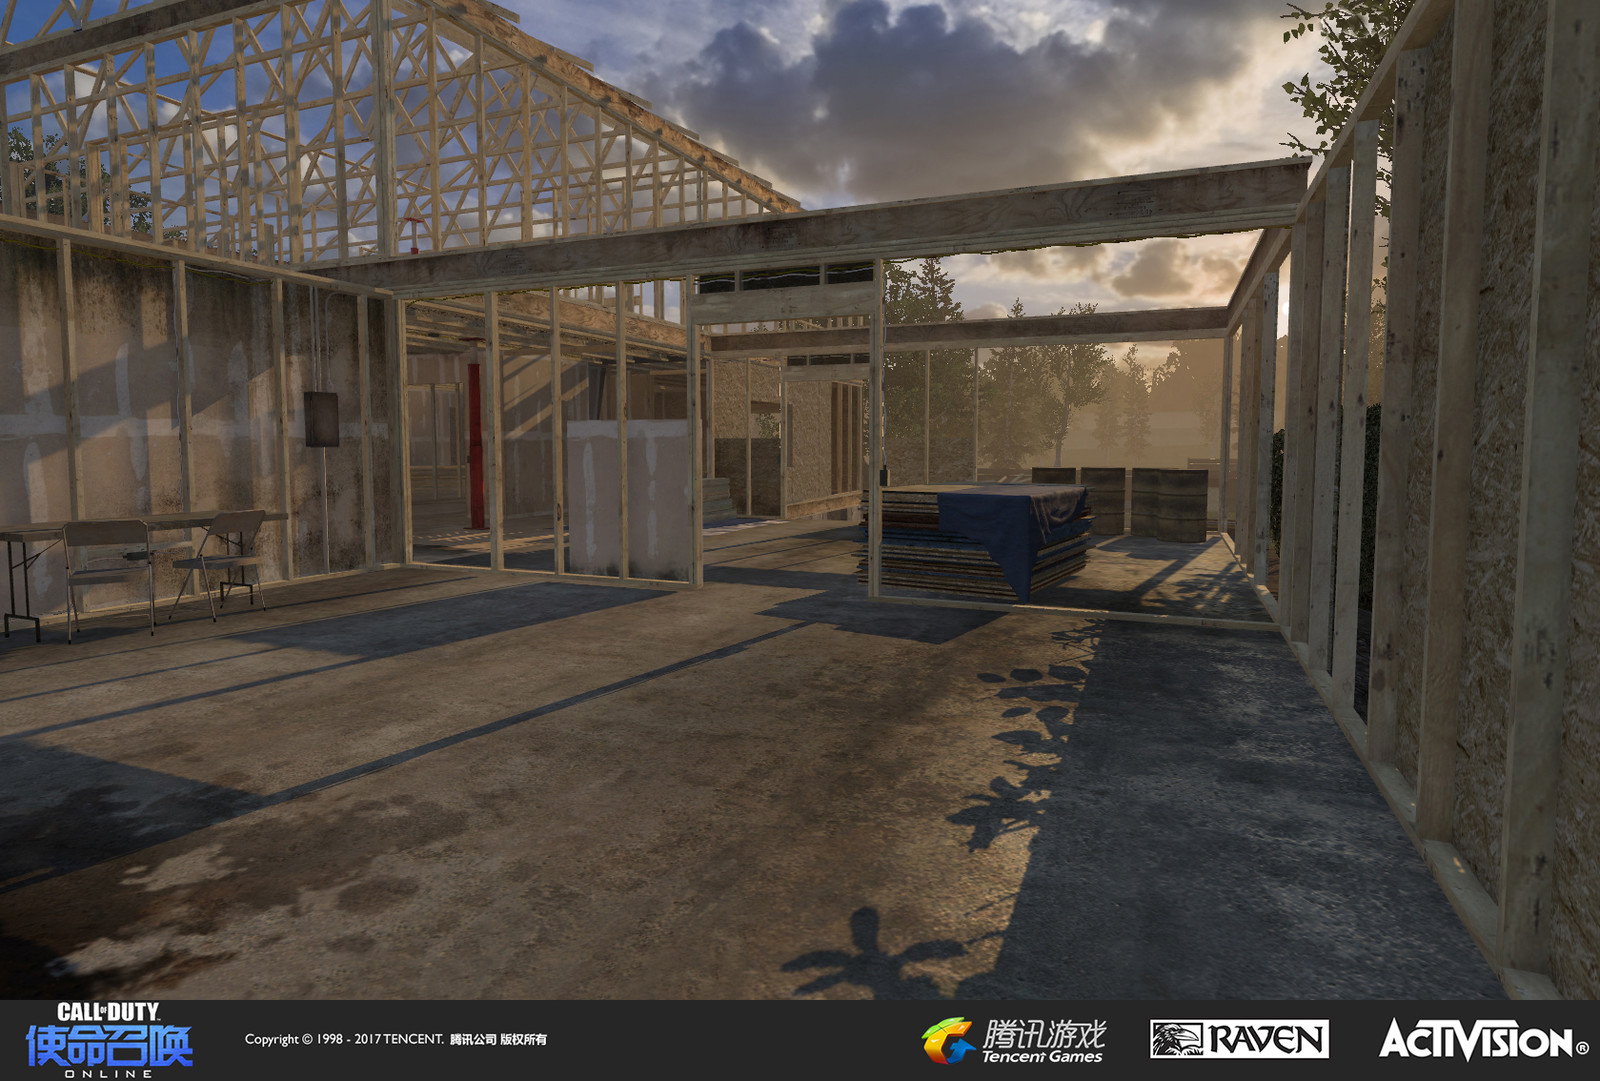 Suburbs: Residential construction site created as an expansion to a re-imagined MW3 map. I created geo, textures, and set dress with an assist by Caleb Tomplait in making the building conform to actual construction specs.